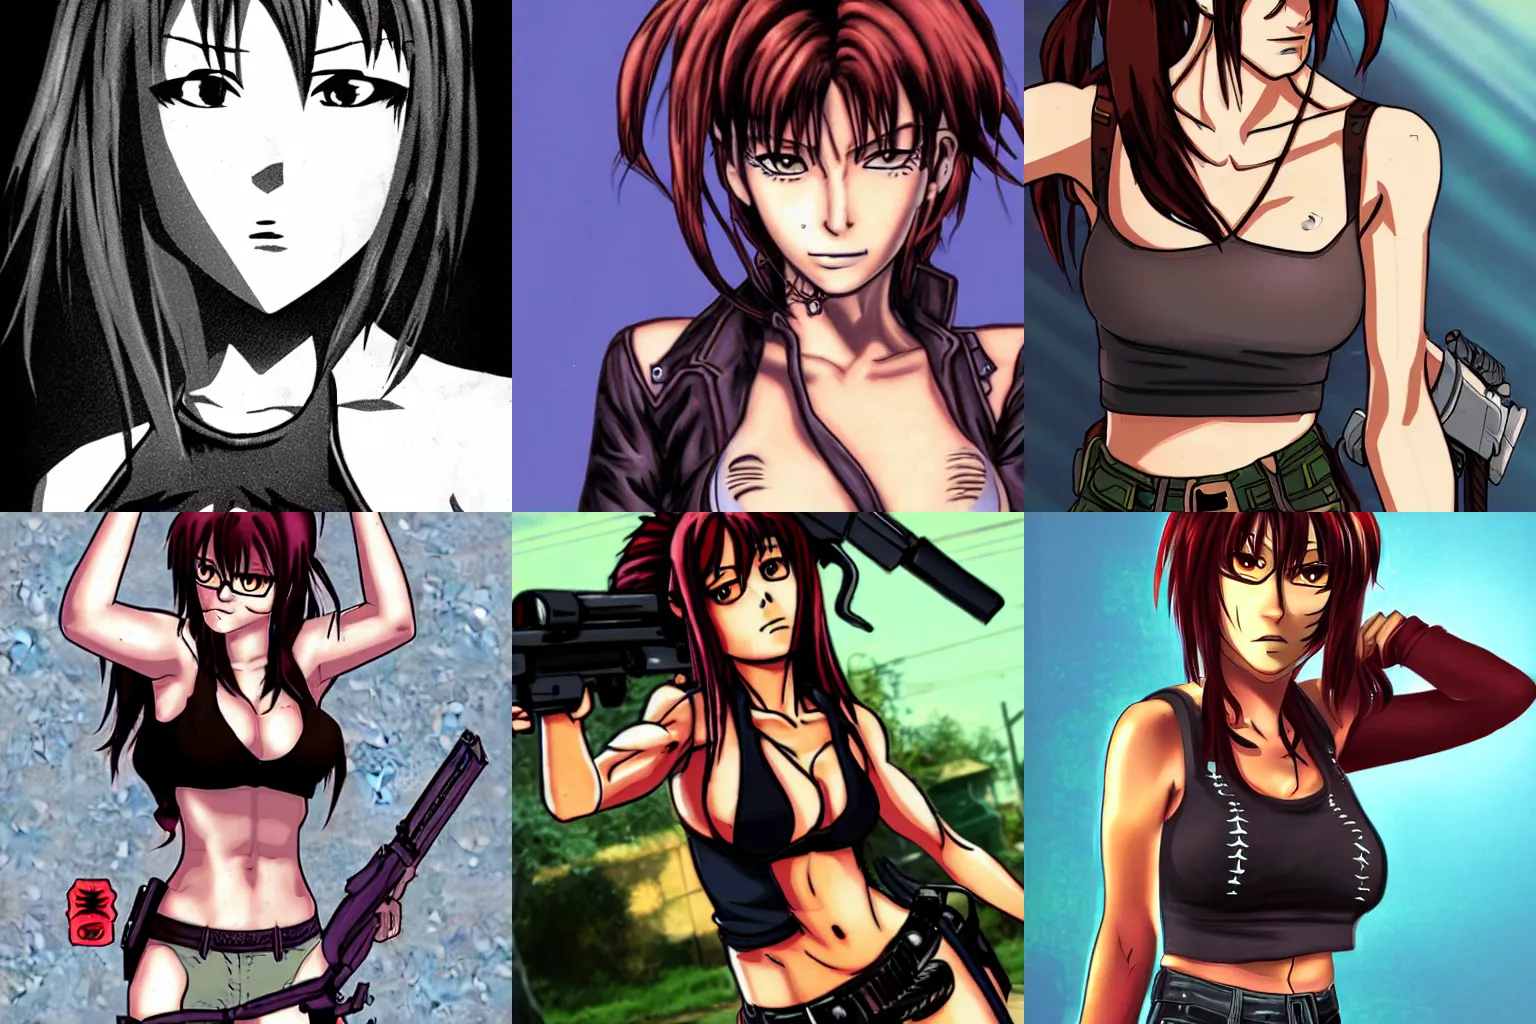 Prompt: fanart of Revy from Black Lagoon